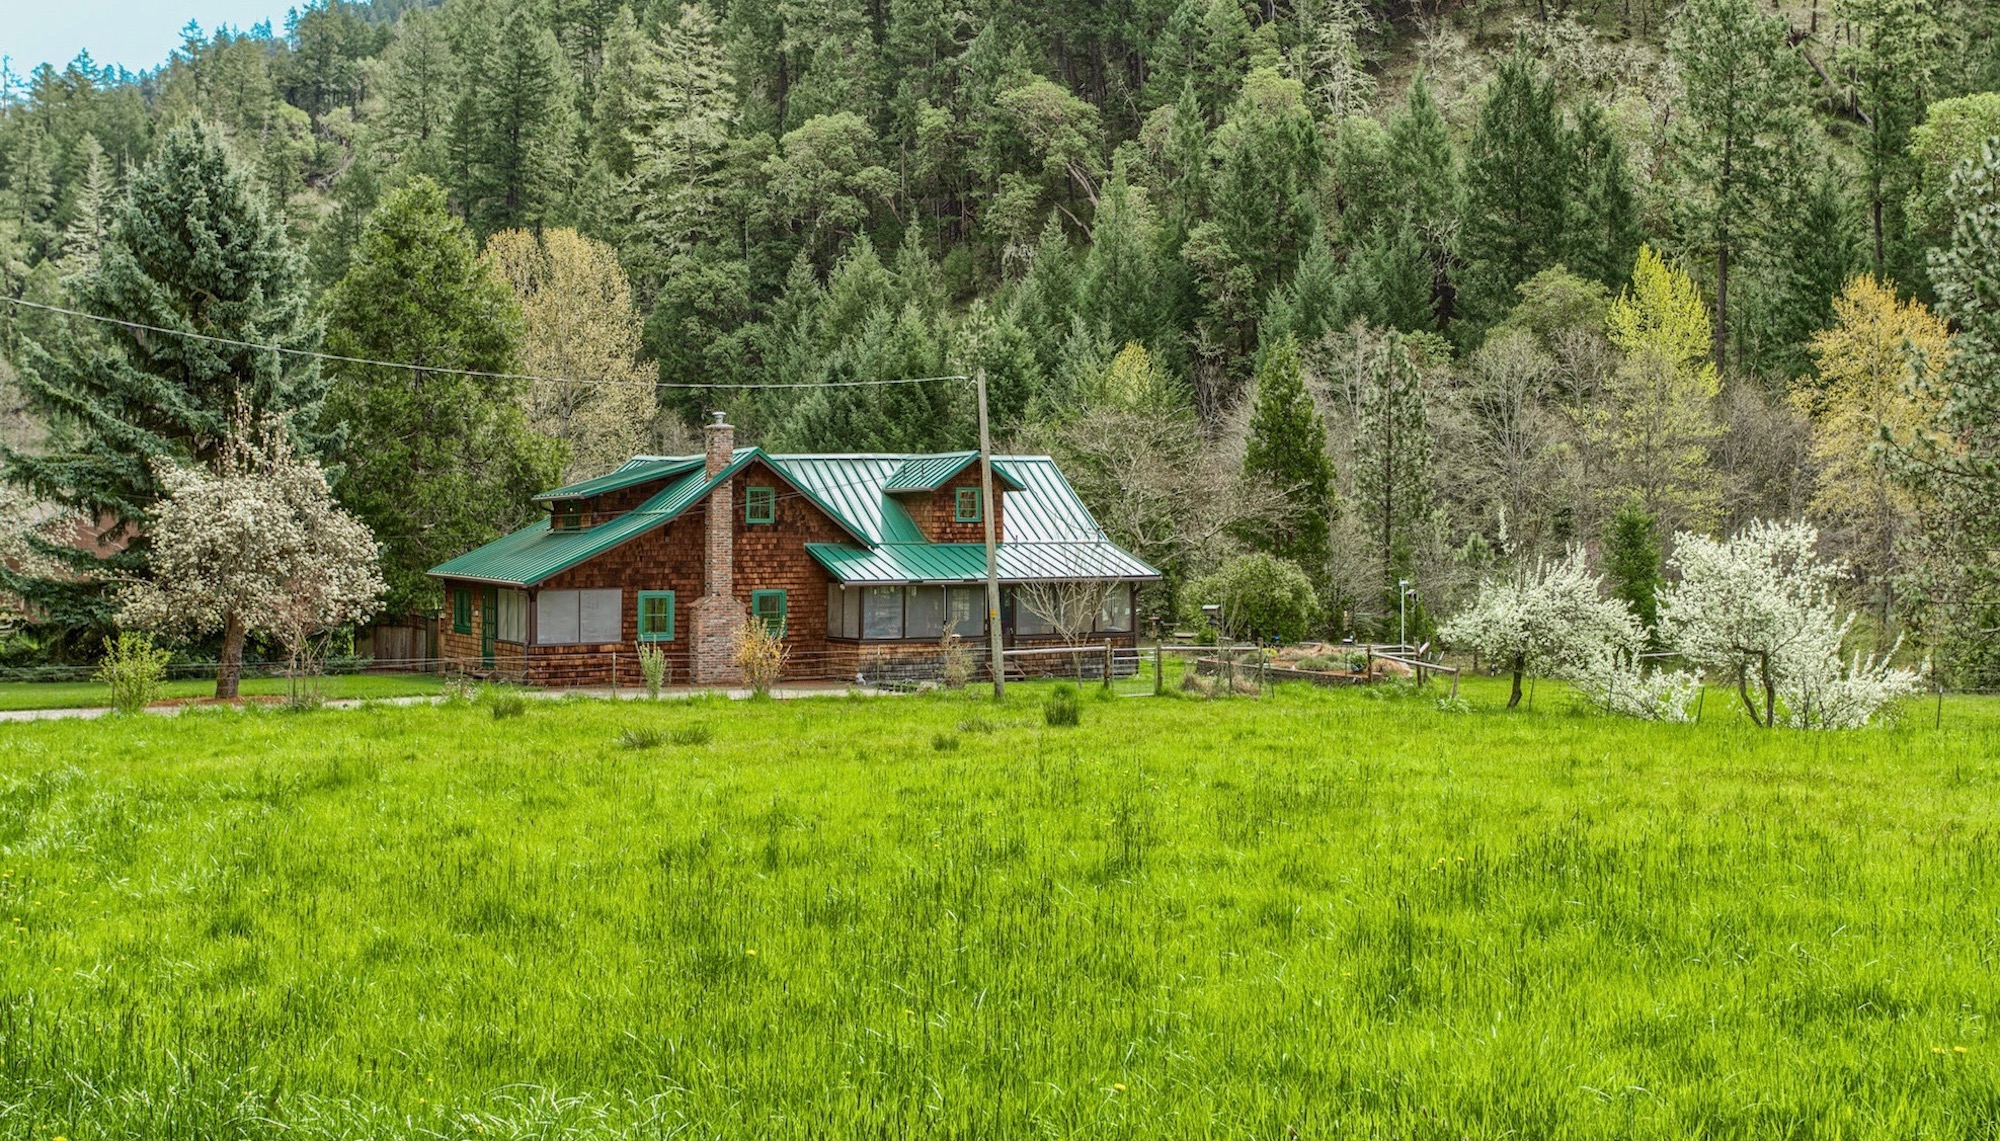 Rogue Valley Homes for sale